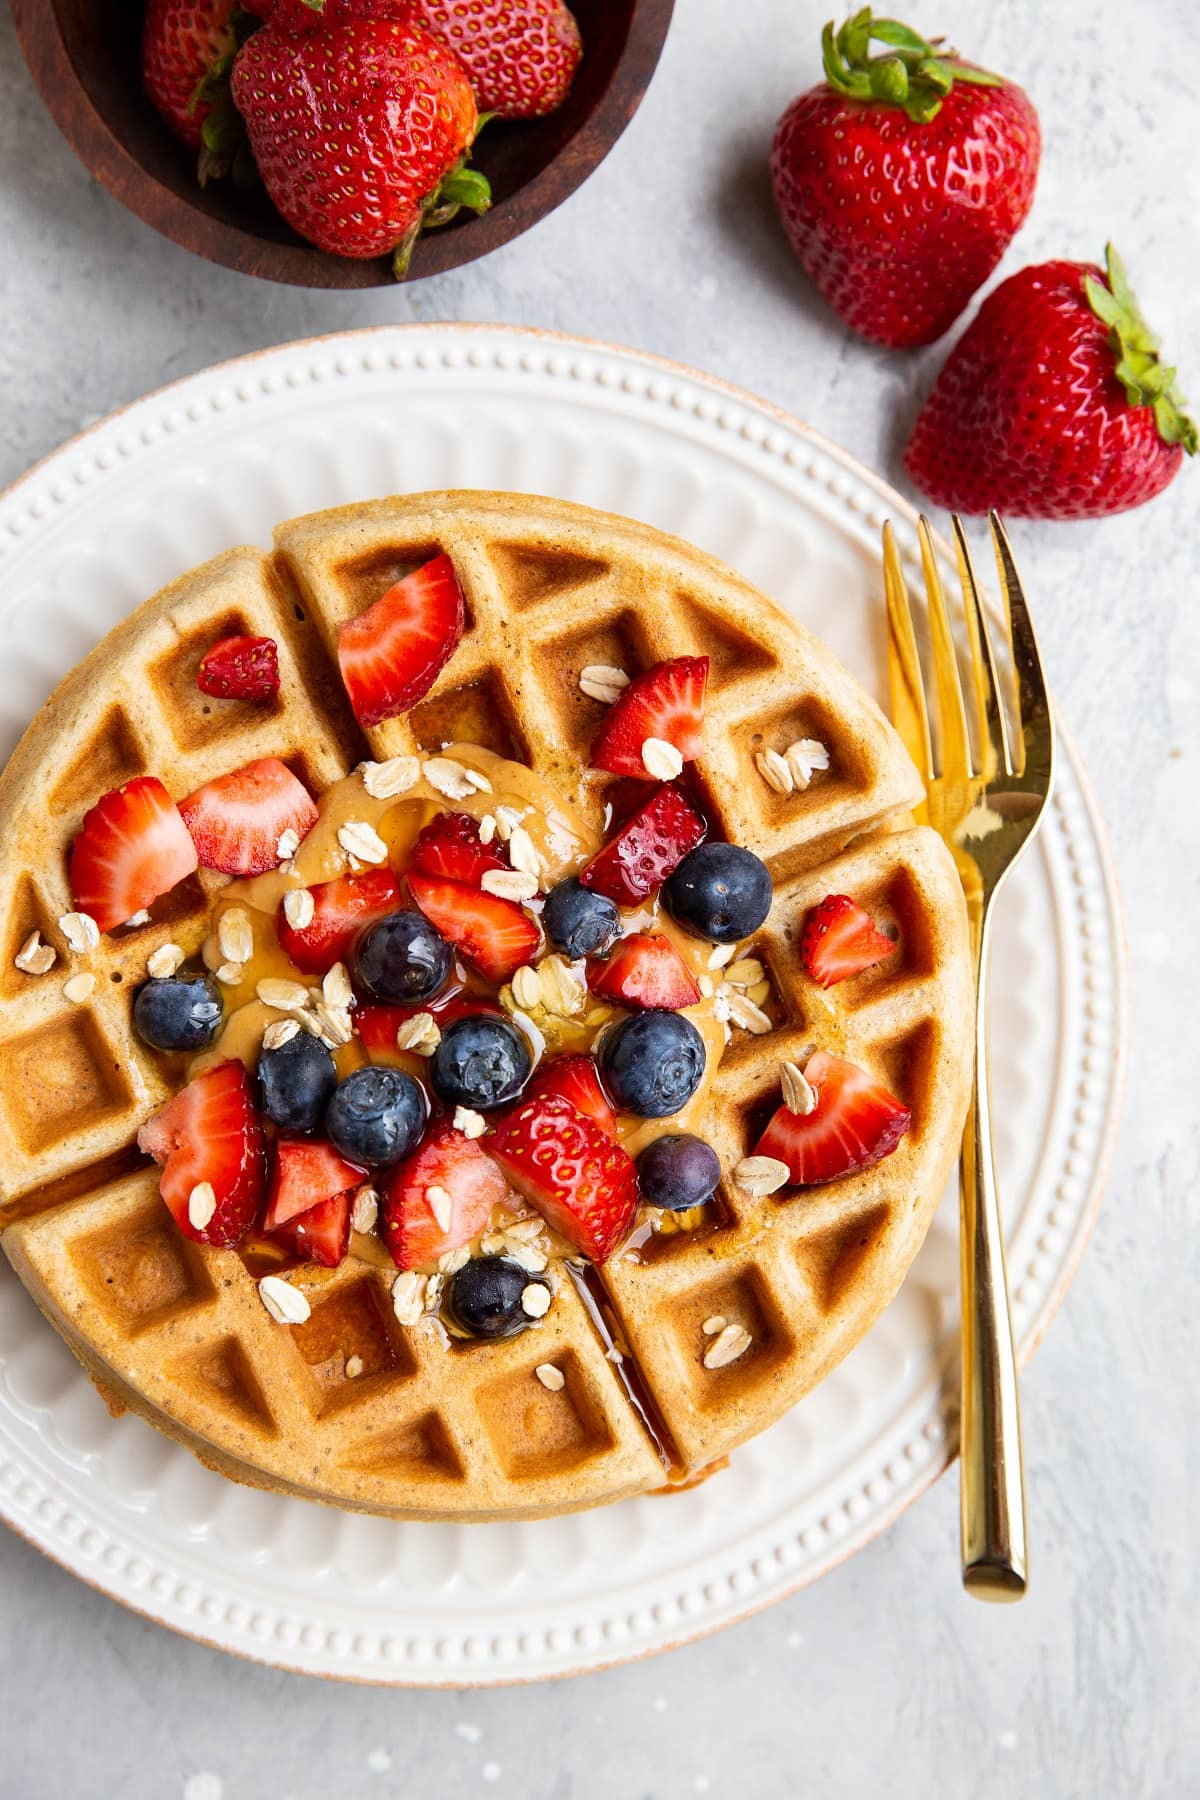 Large waffle on a plate with fresh strawberries and blueberries and a gold fork.